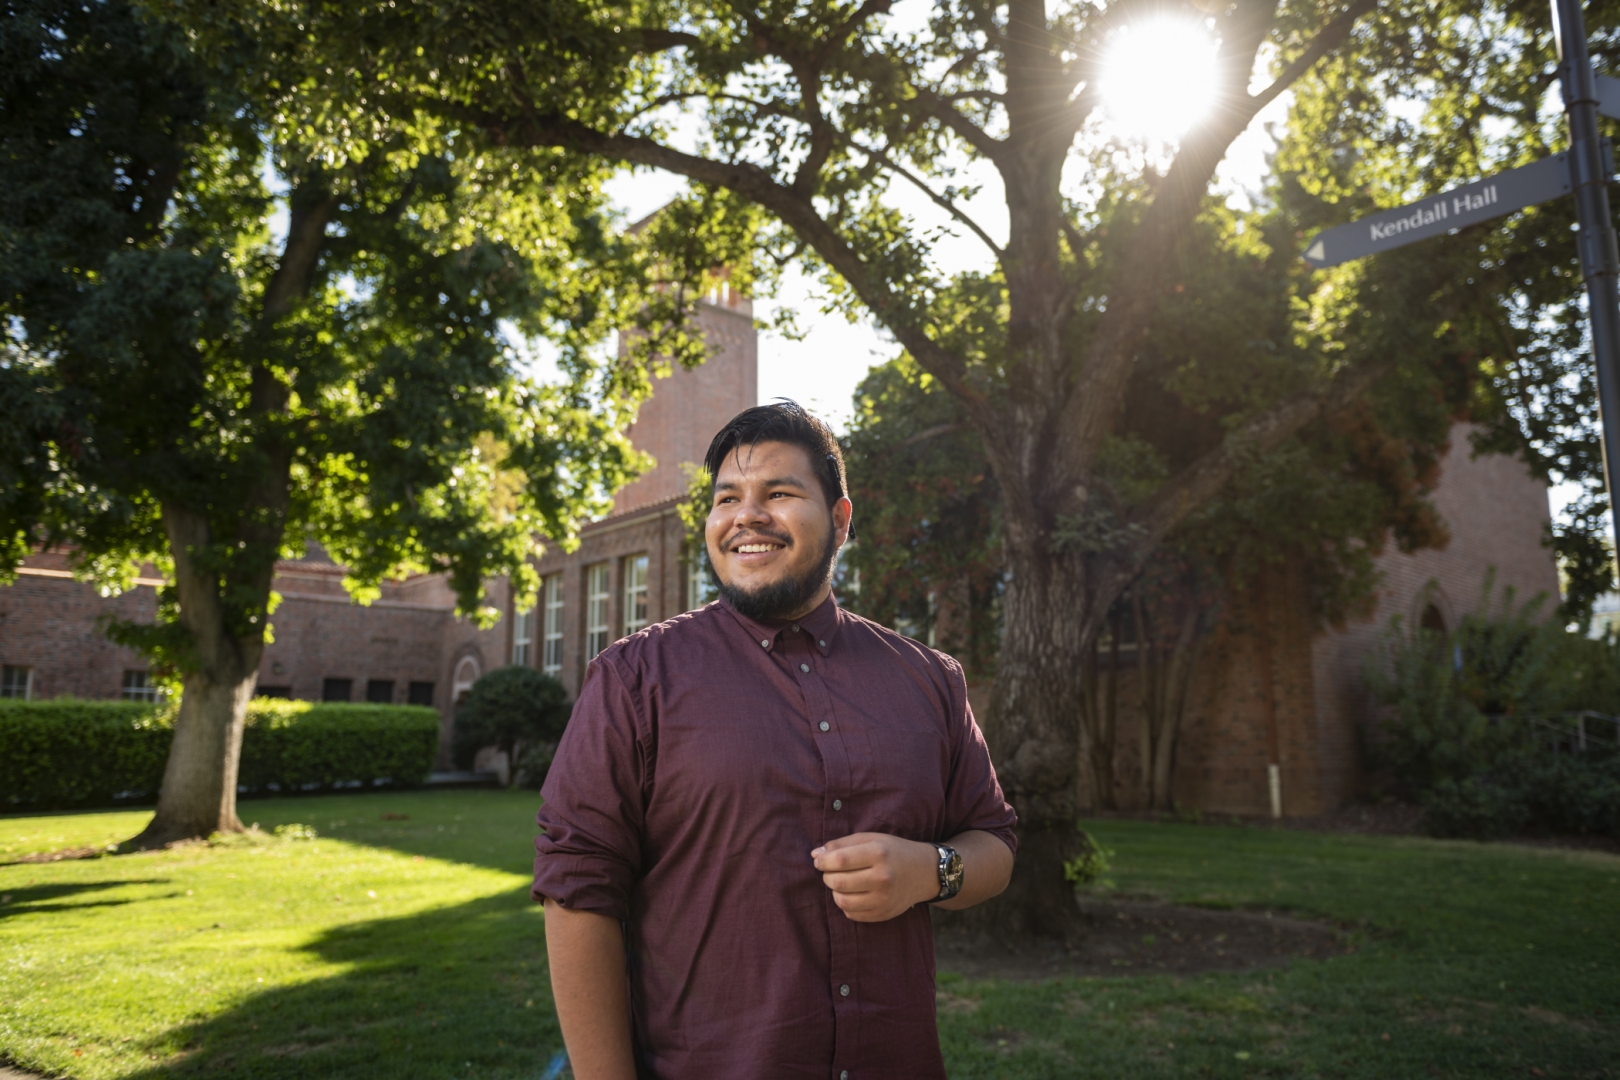 Gustavo Martir smiles in front of Trinity Hall with the sun shining through the trees in the background